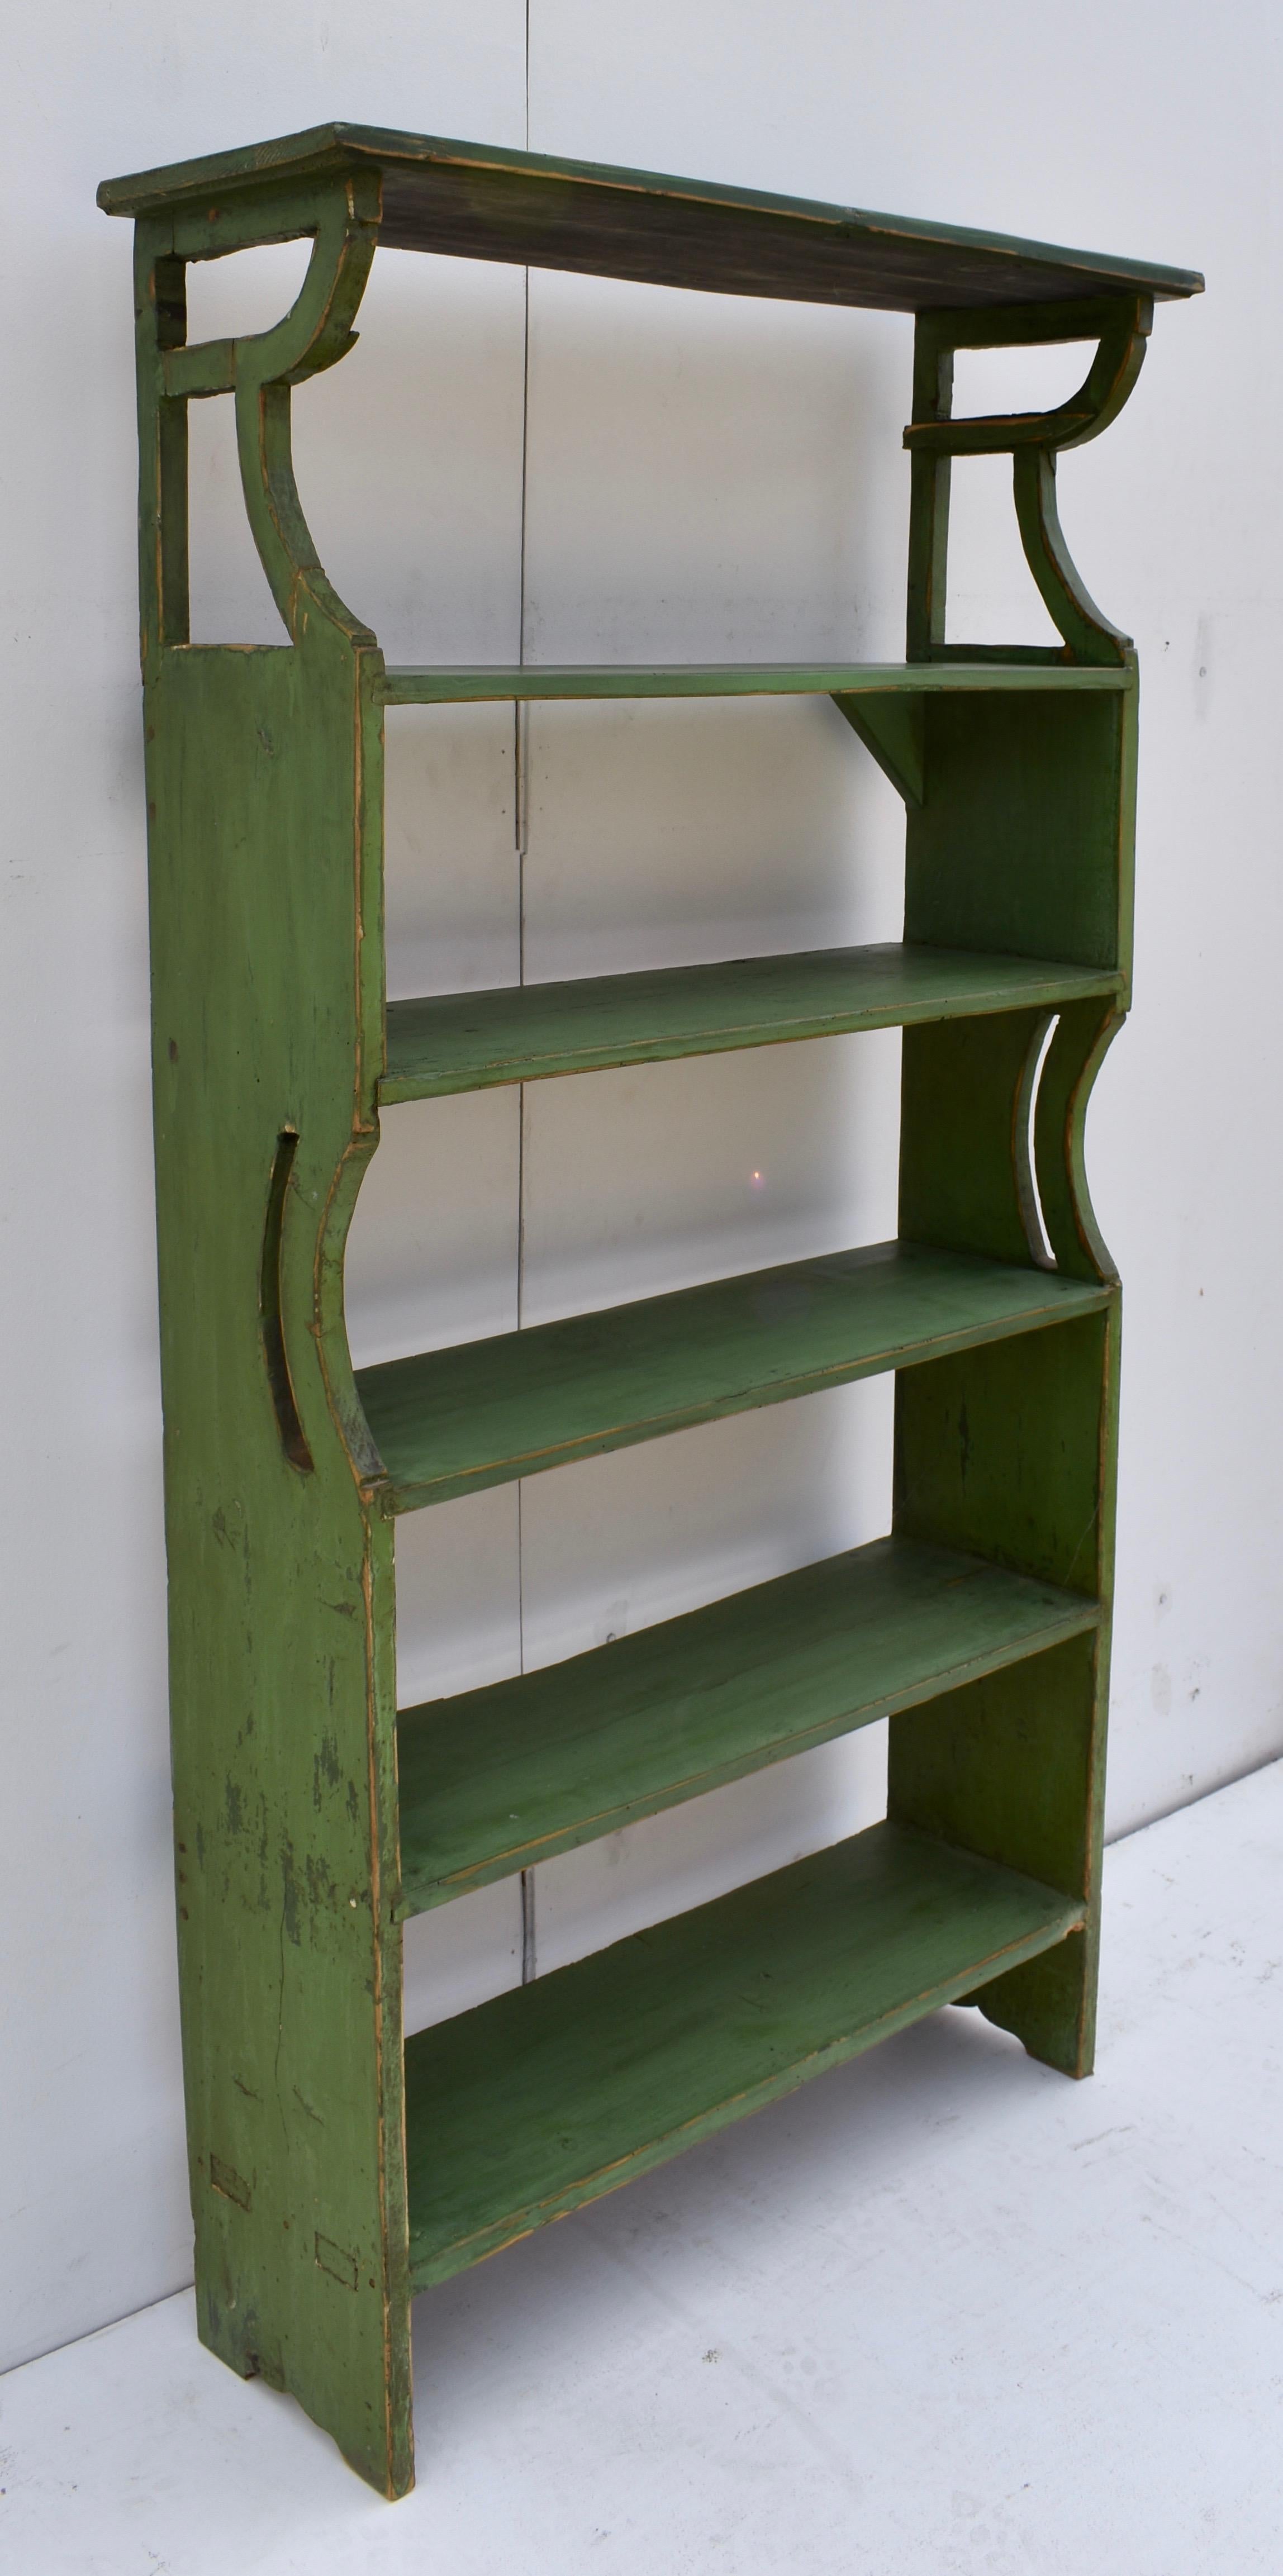 This narrow and low profile run of shelves offers four more or less equal spaces for books or pots and pans, and a larger space at the top, perhaps for display. It is built to withstand weight, with the bottom shelf through-tenoned and the other